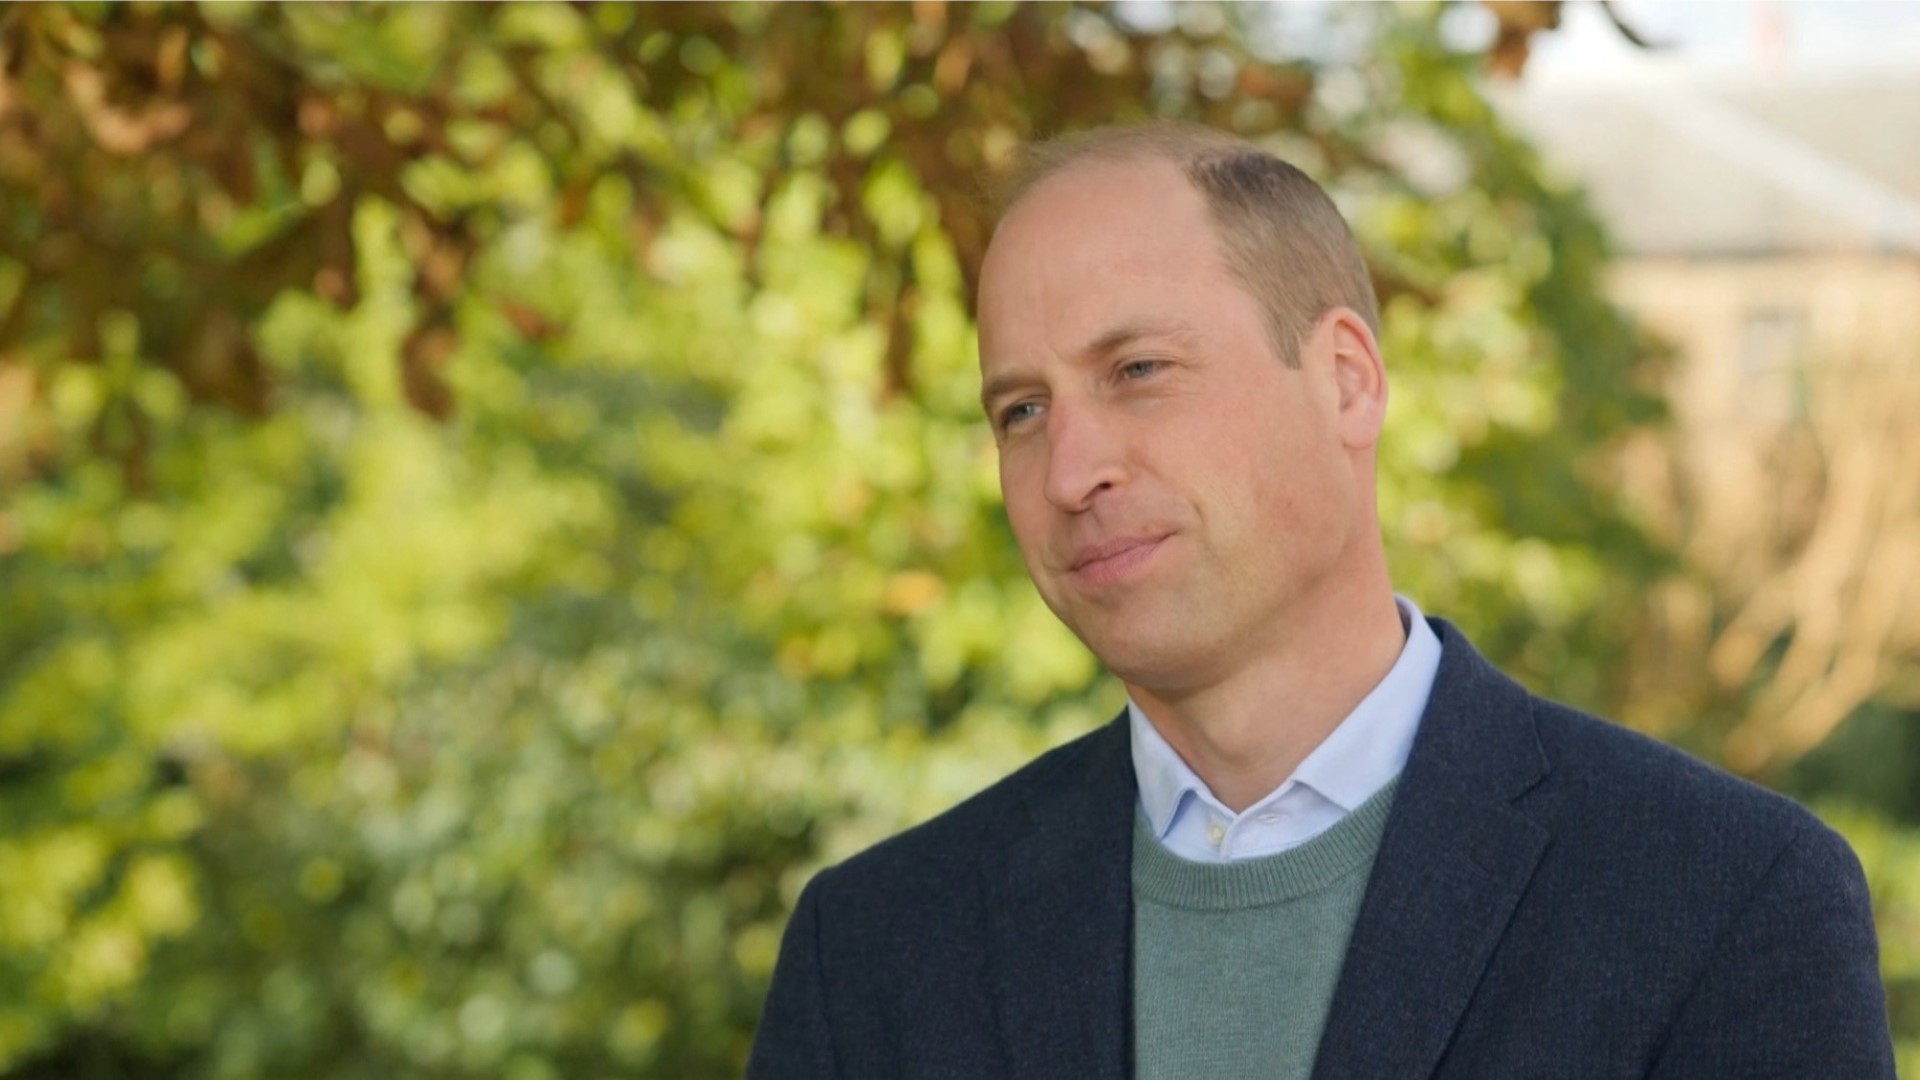 Prince William gave a TED talk discussing his climate initiative Earthshot and revealed his favorite US President. Buzz60's Keri Lumm has more.